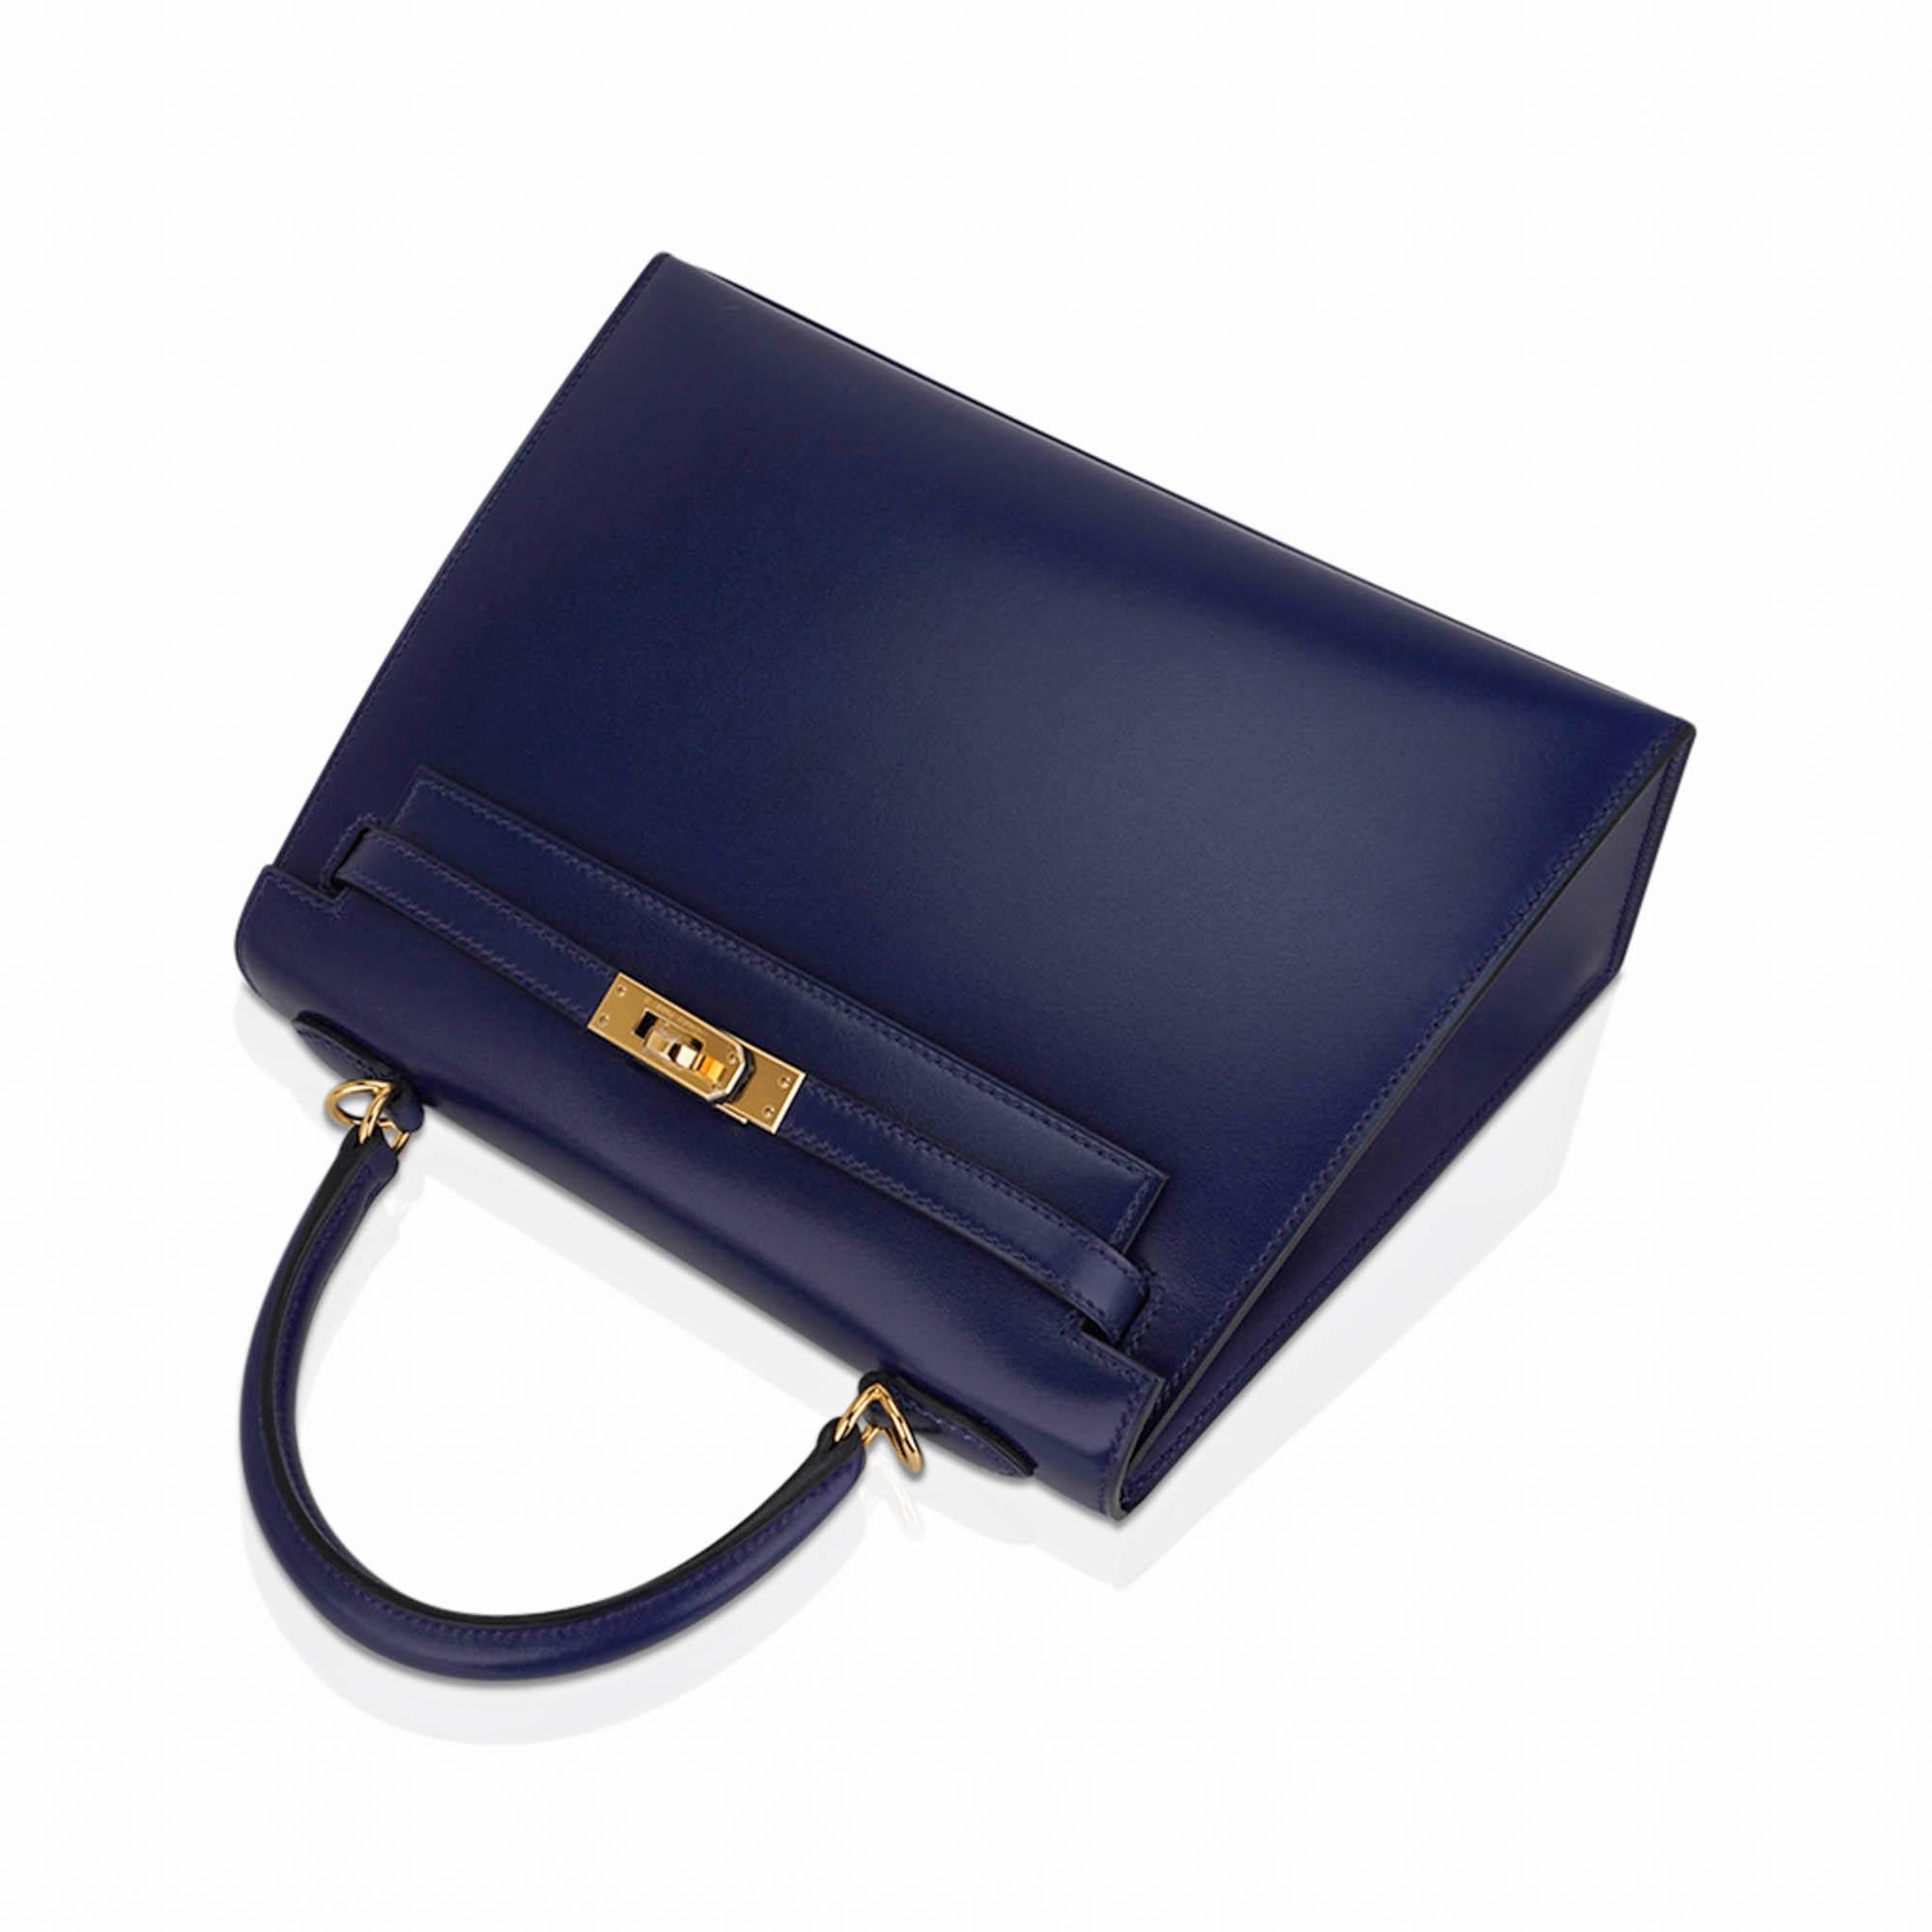 Hermes Kelly 25 Sellier Blue Sapphire Box Leather Bag Gold Hardware For Sale 4